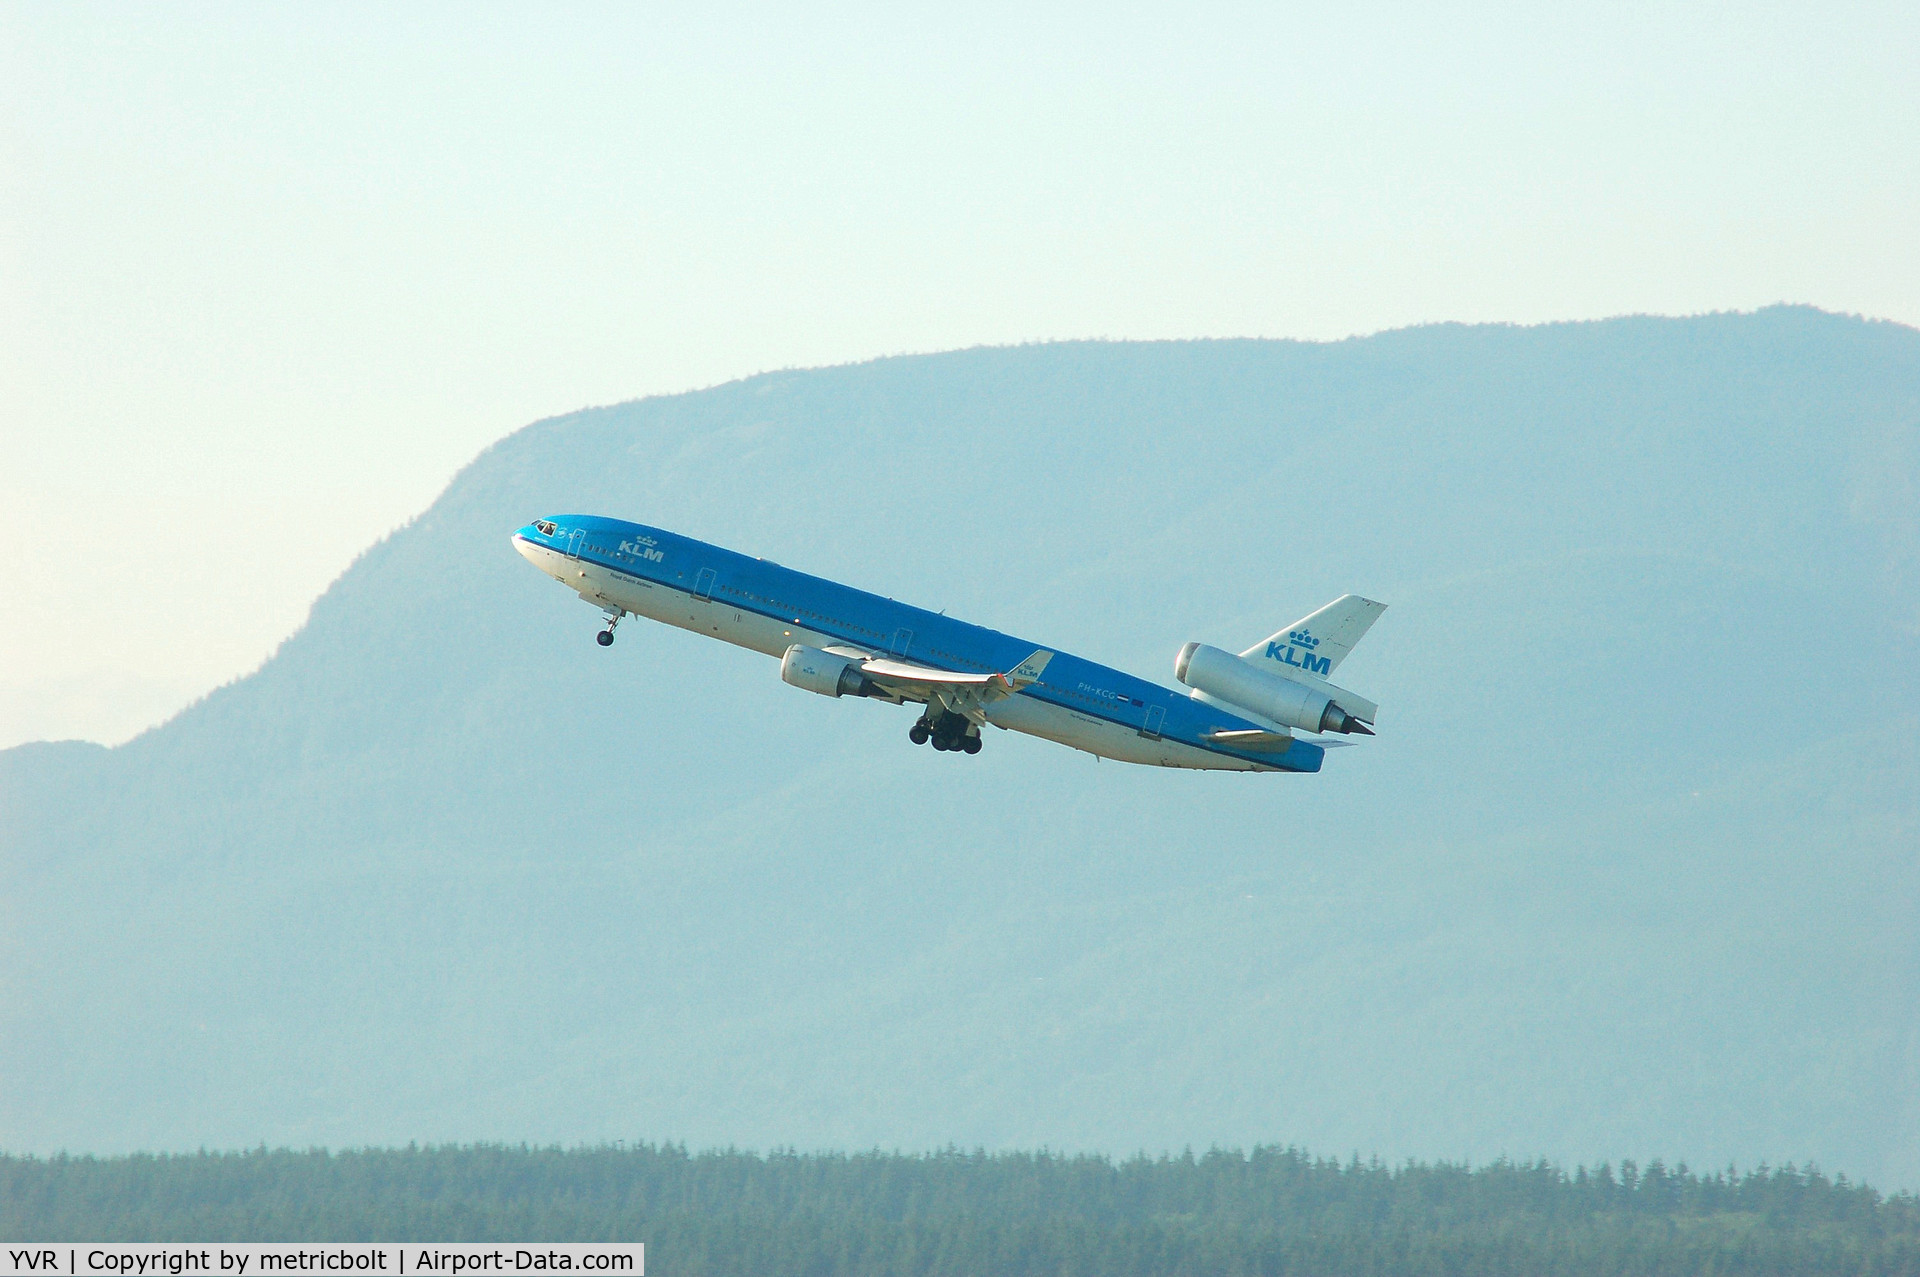 Vancouver International Airport, Vancouver, British Columbia Canada (YVR) - KLM MD-11 departing YVR for AMS,summer 2007